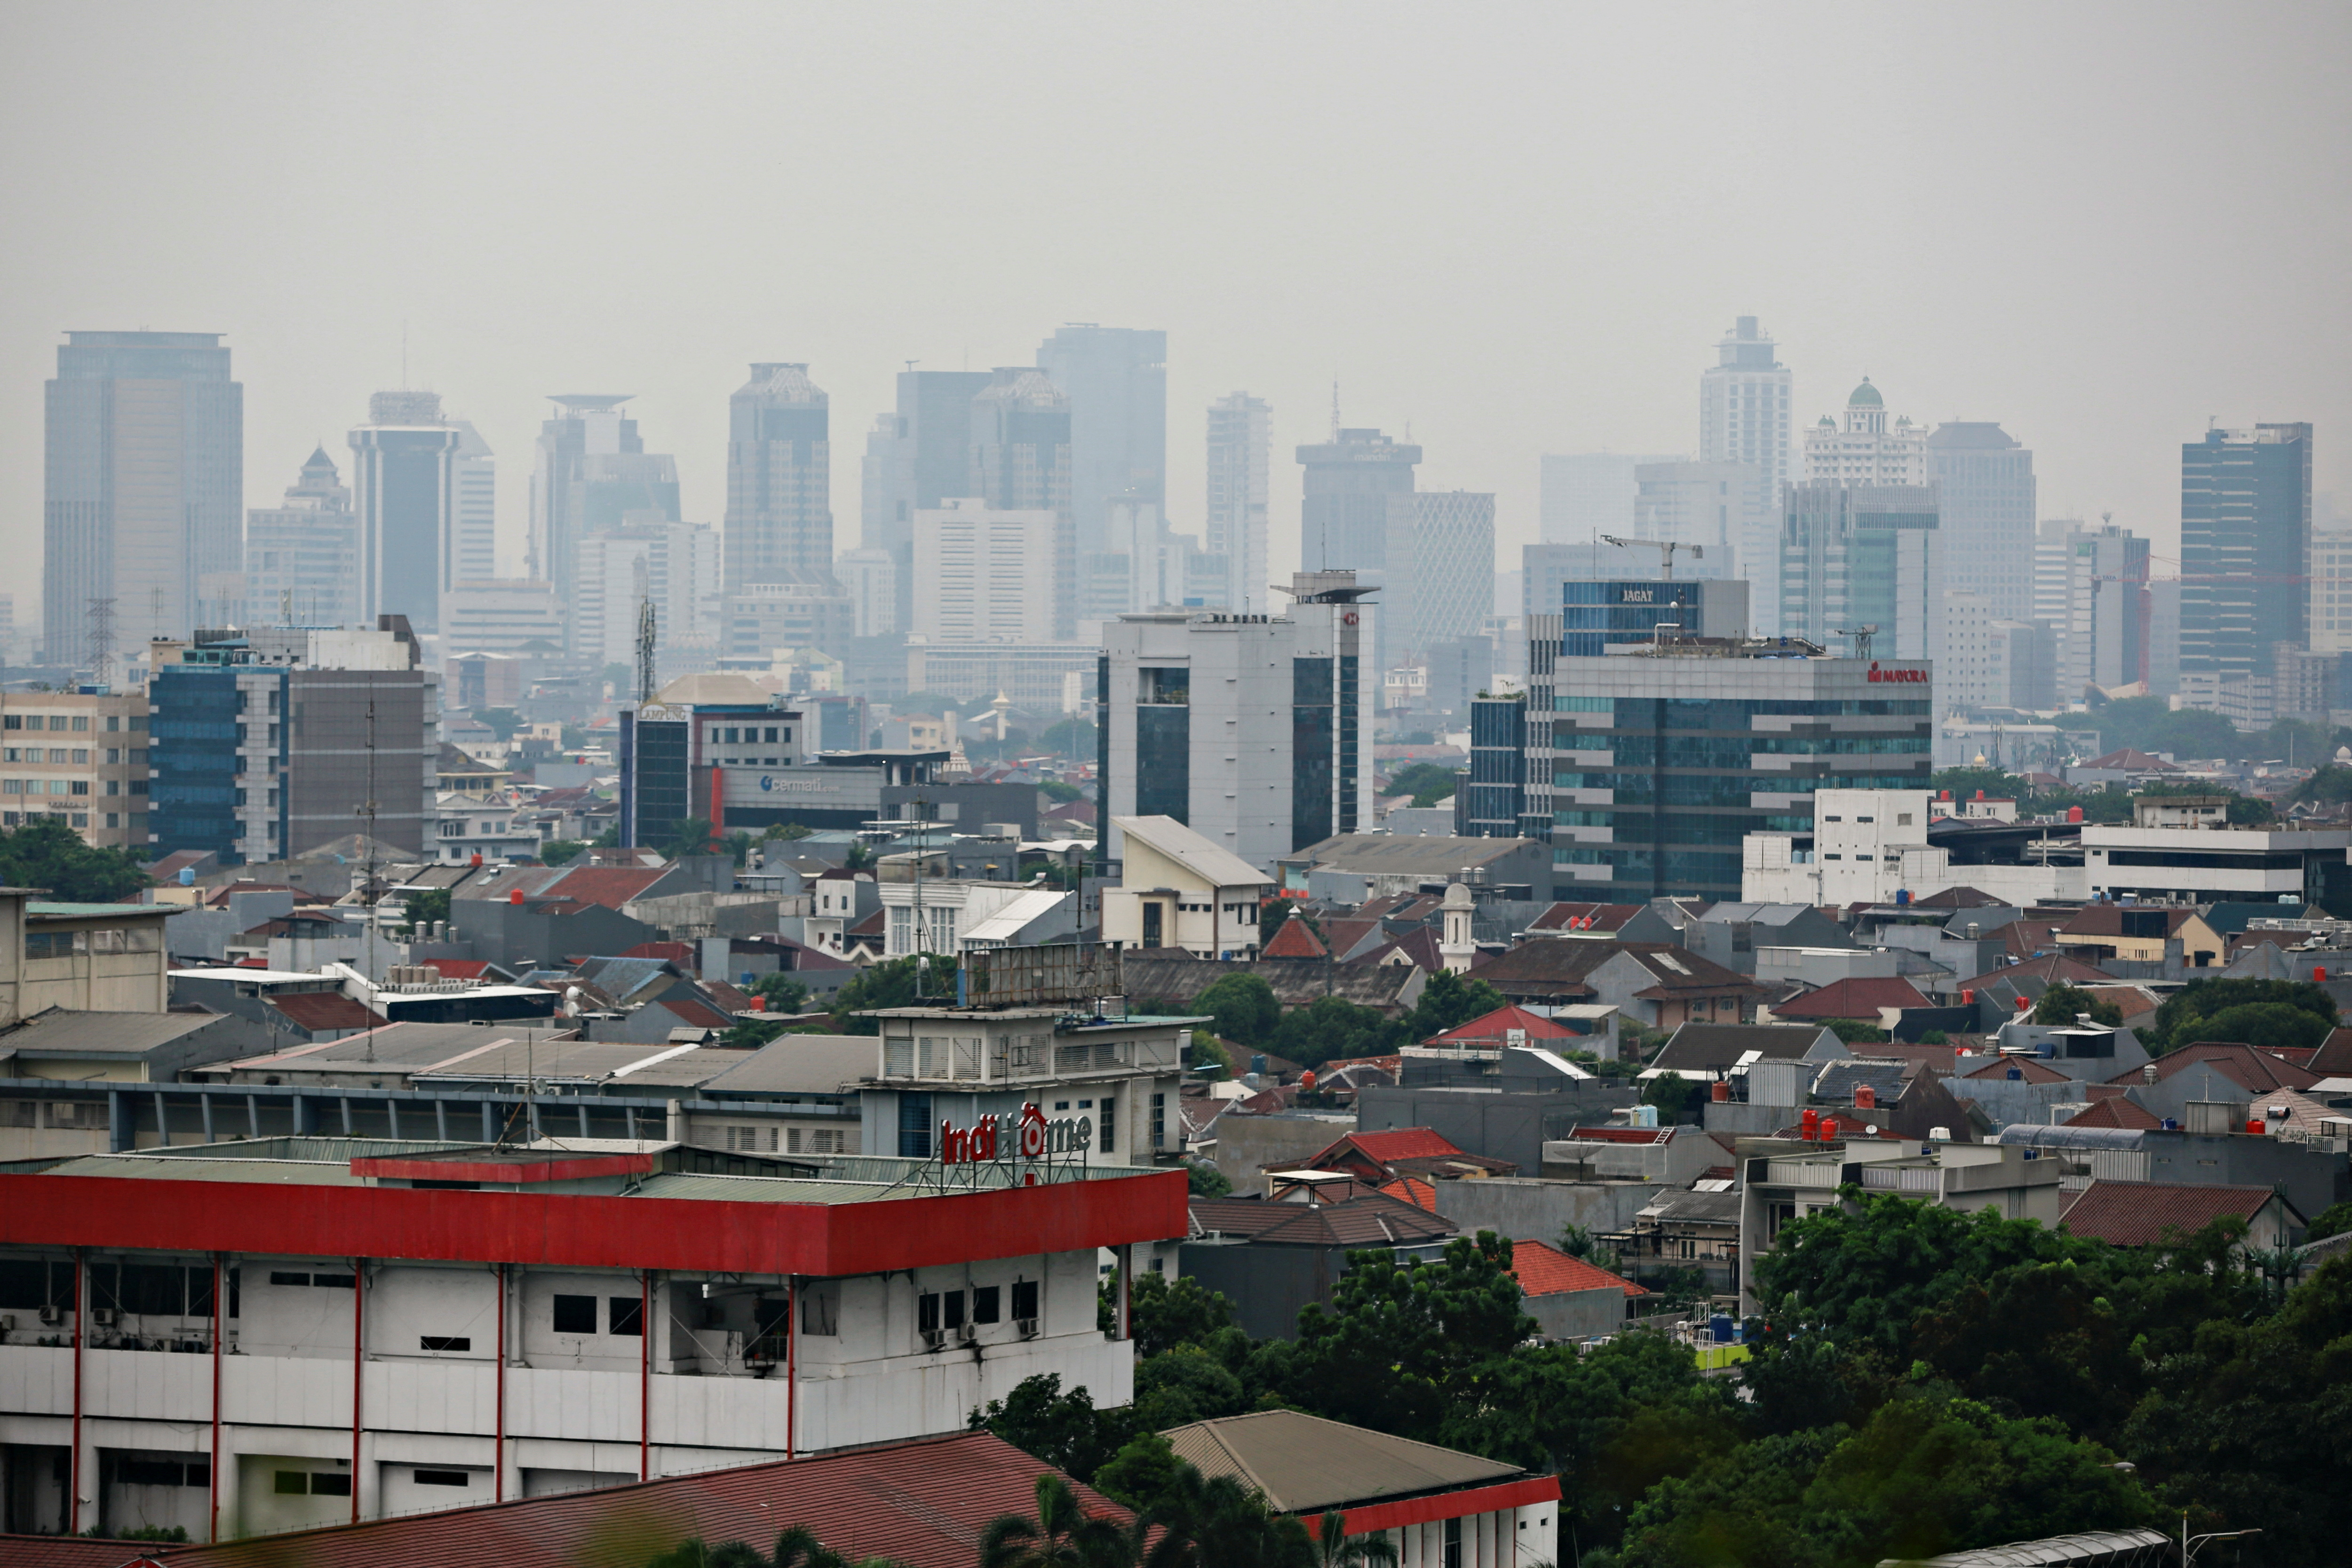 A general view of the city skyline of Jakarta, the capital city of Indonesia